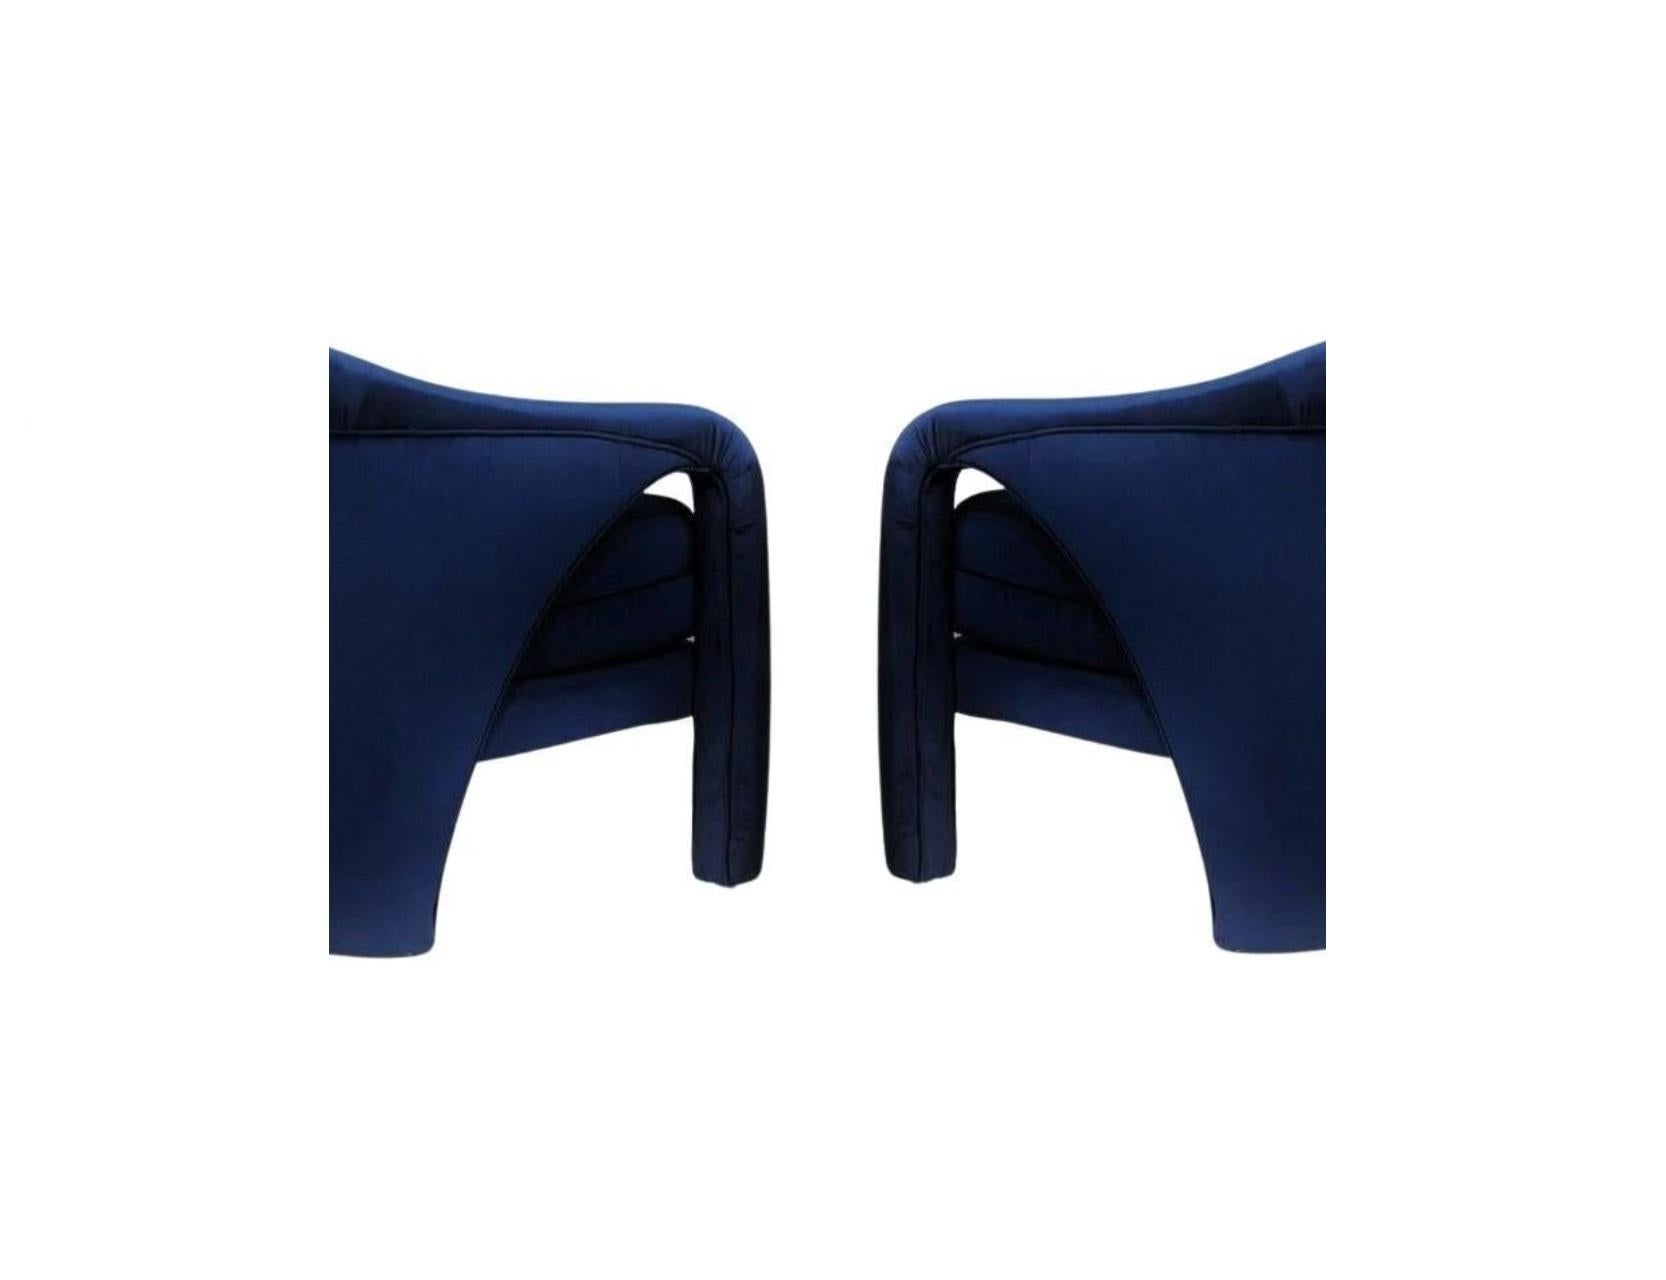 Vladimir Kaganesque Navy Blue Lounge Chairs by Weiman For Sale 4